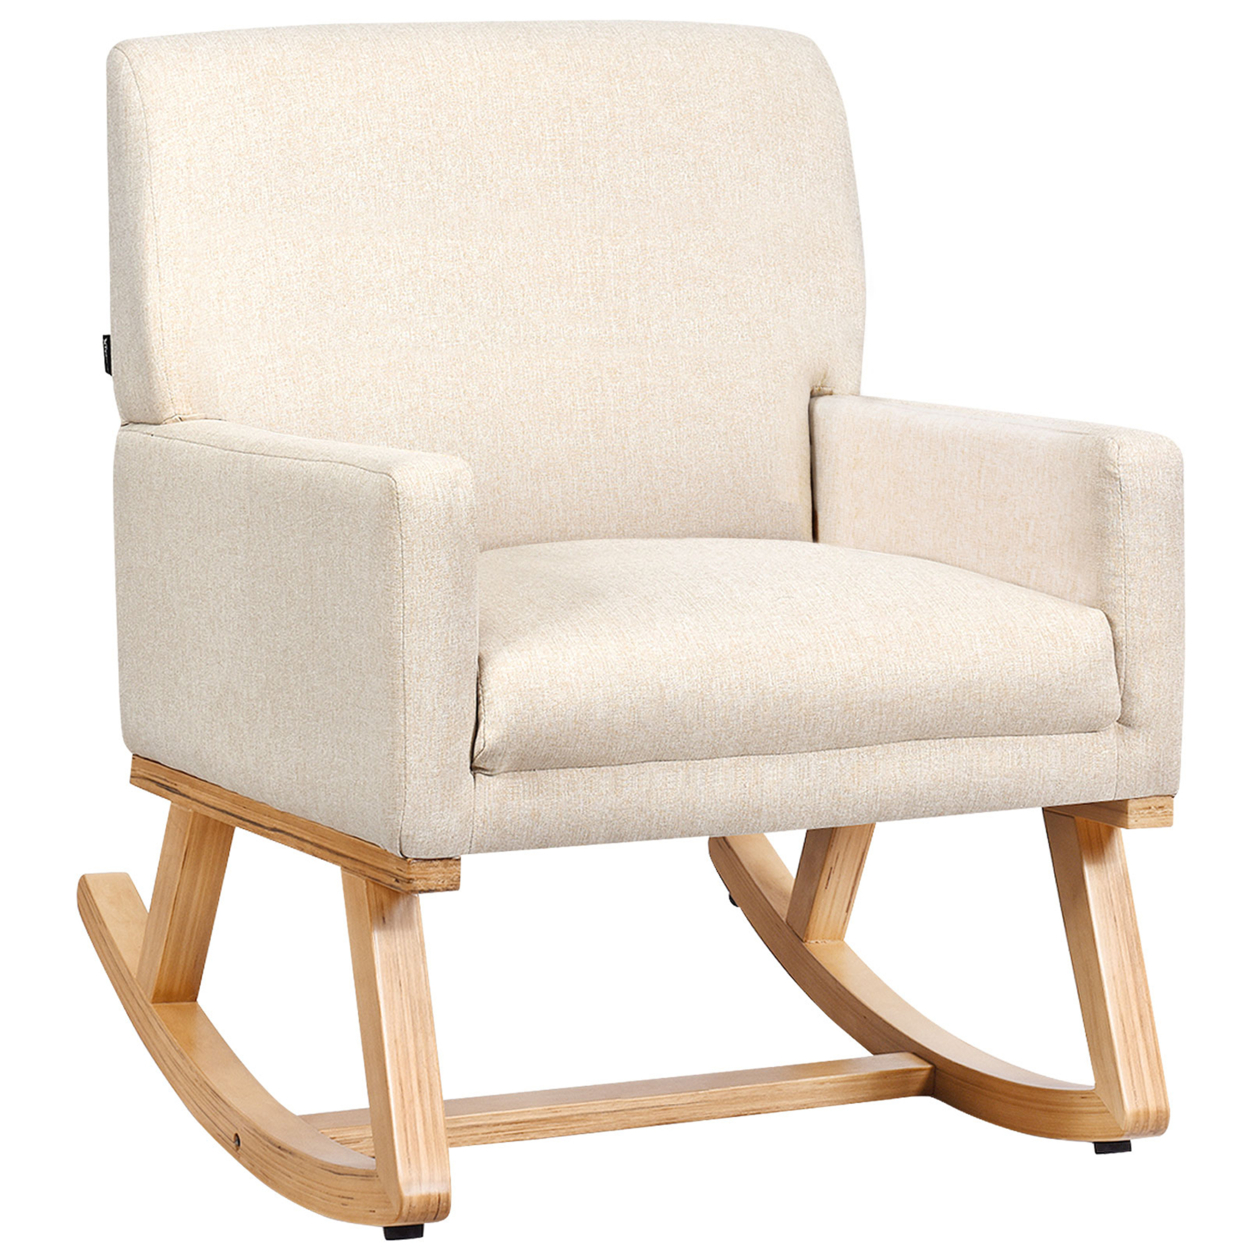 Mid Century Fabric Rocking Chair Upholstered Accent Armchair Lounge Chair Beige/Gray - Beige